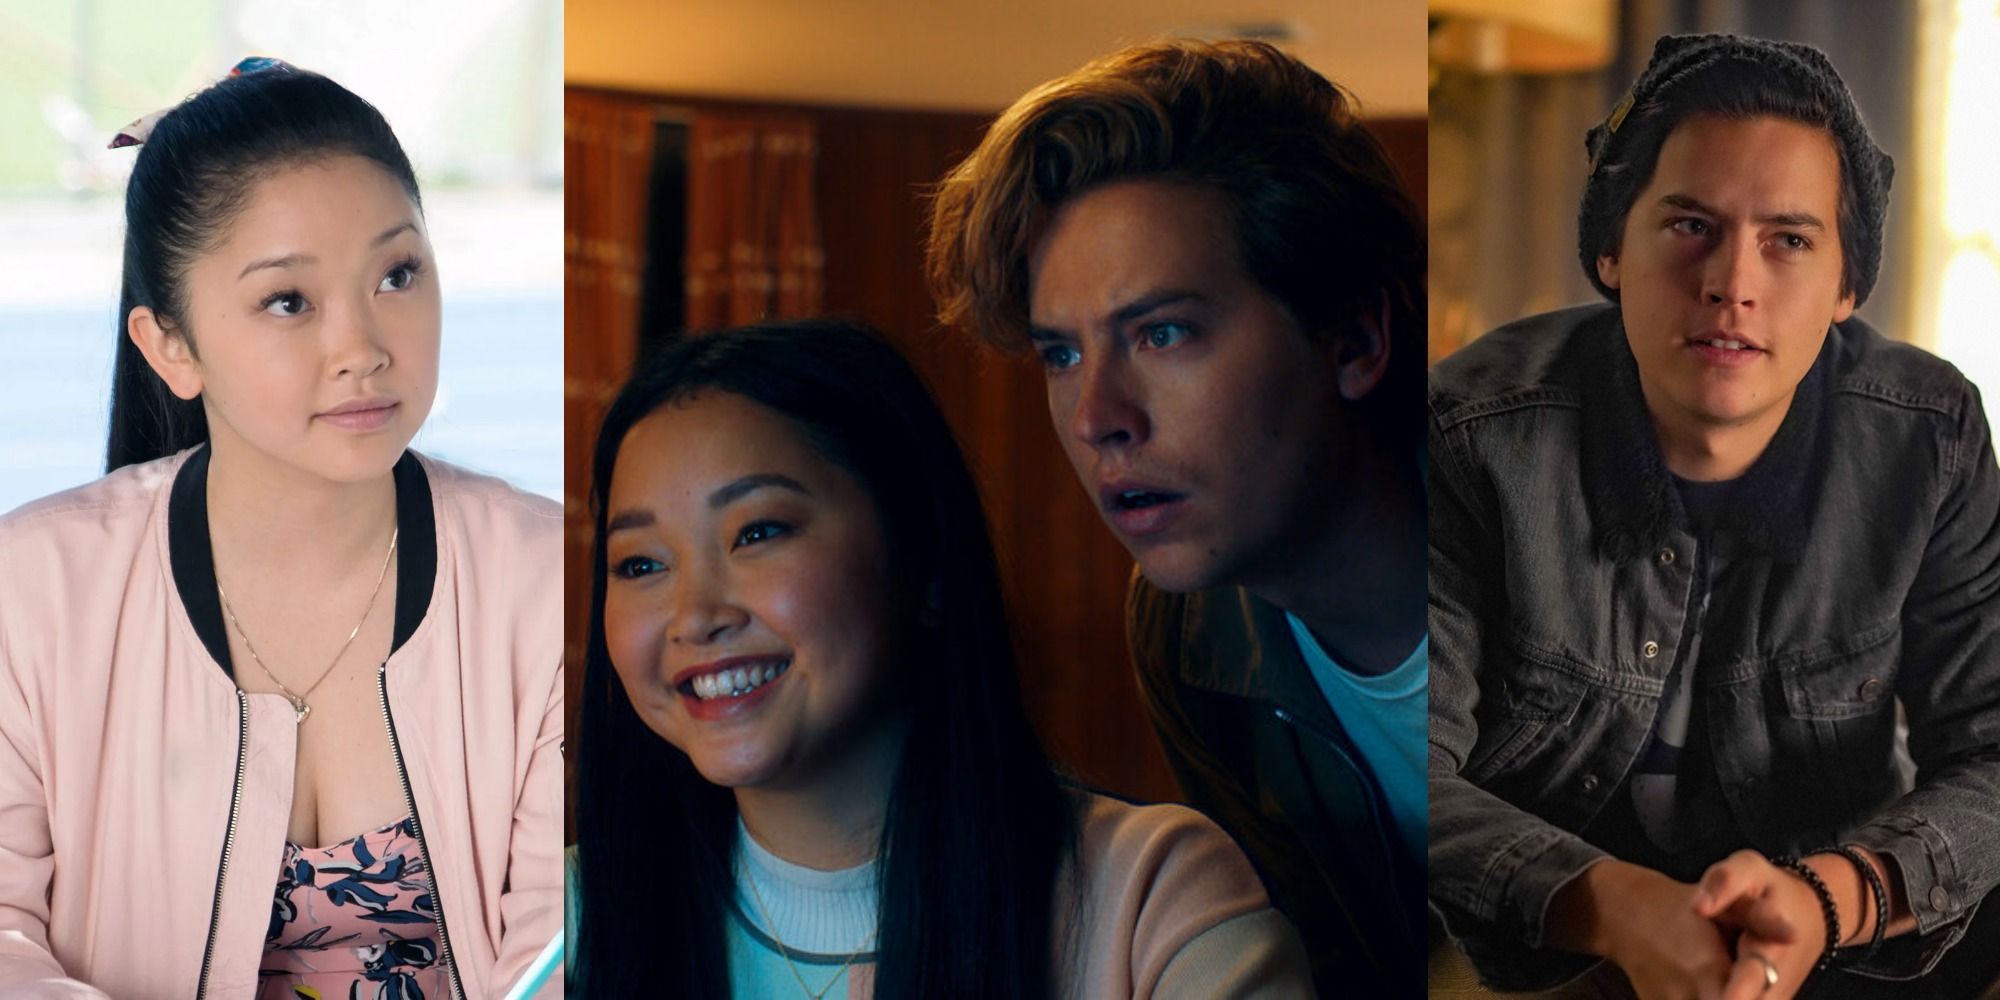 Split image showing Lana Candor in To All The Boys and Moonshot, and Cole Sprouse in Moondshot and Riverdale.